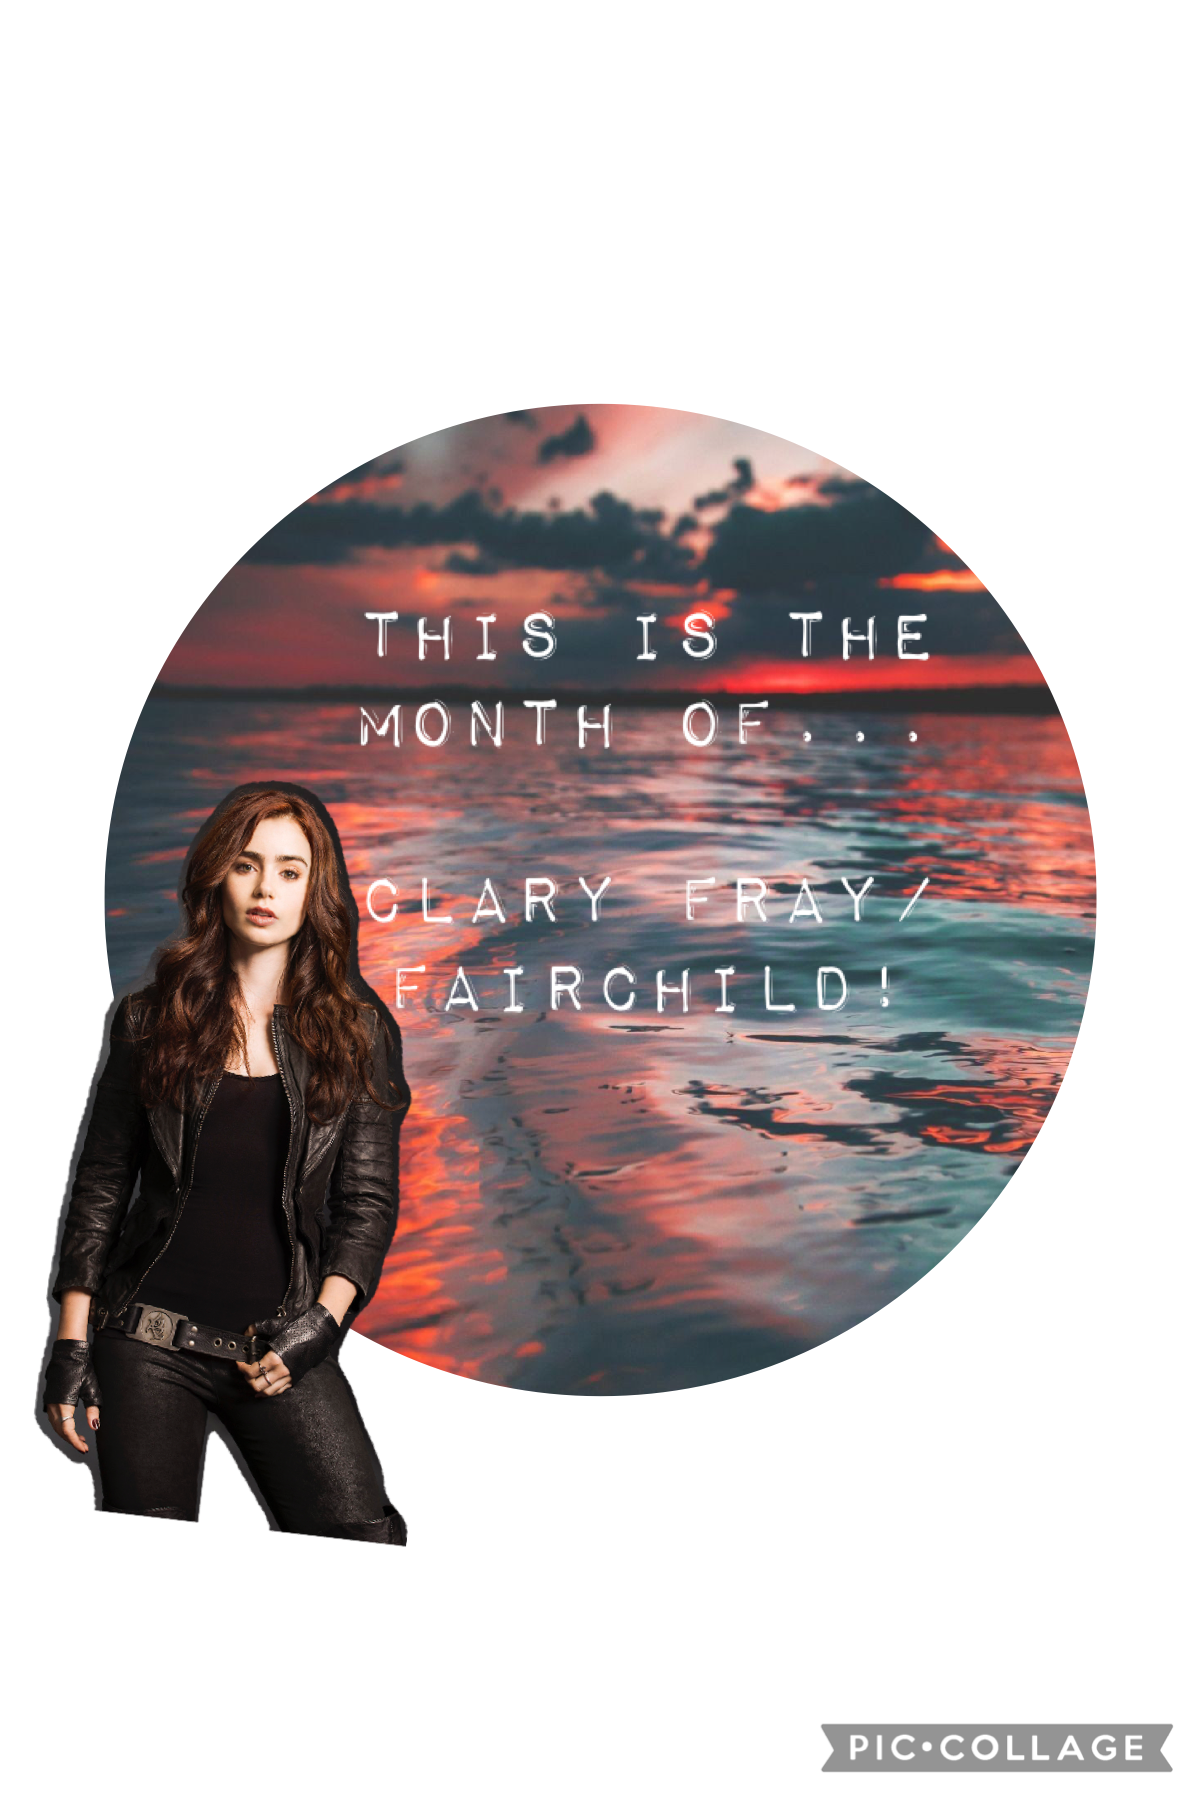 TAP

this month is the month of clary fray/fairchild! I will be posting stuff related to her the whole month of April-May! Enjoy!